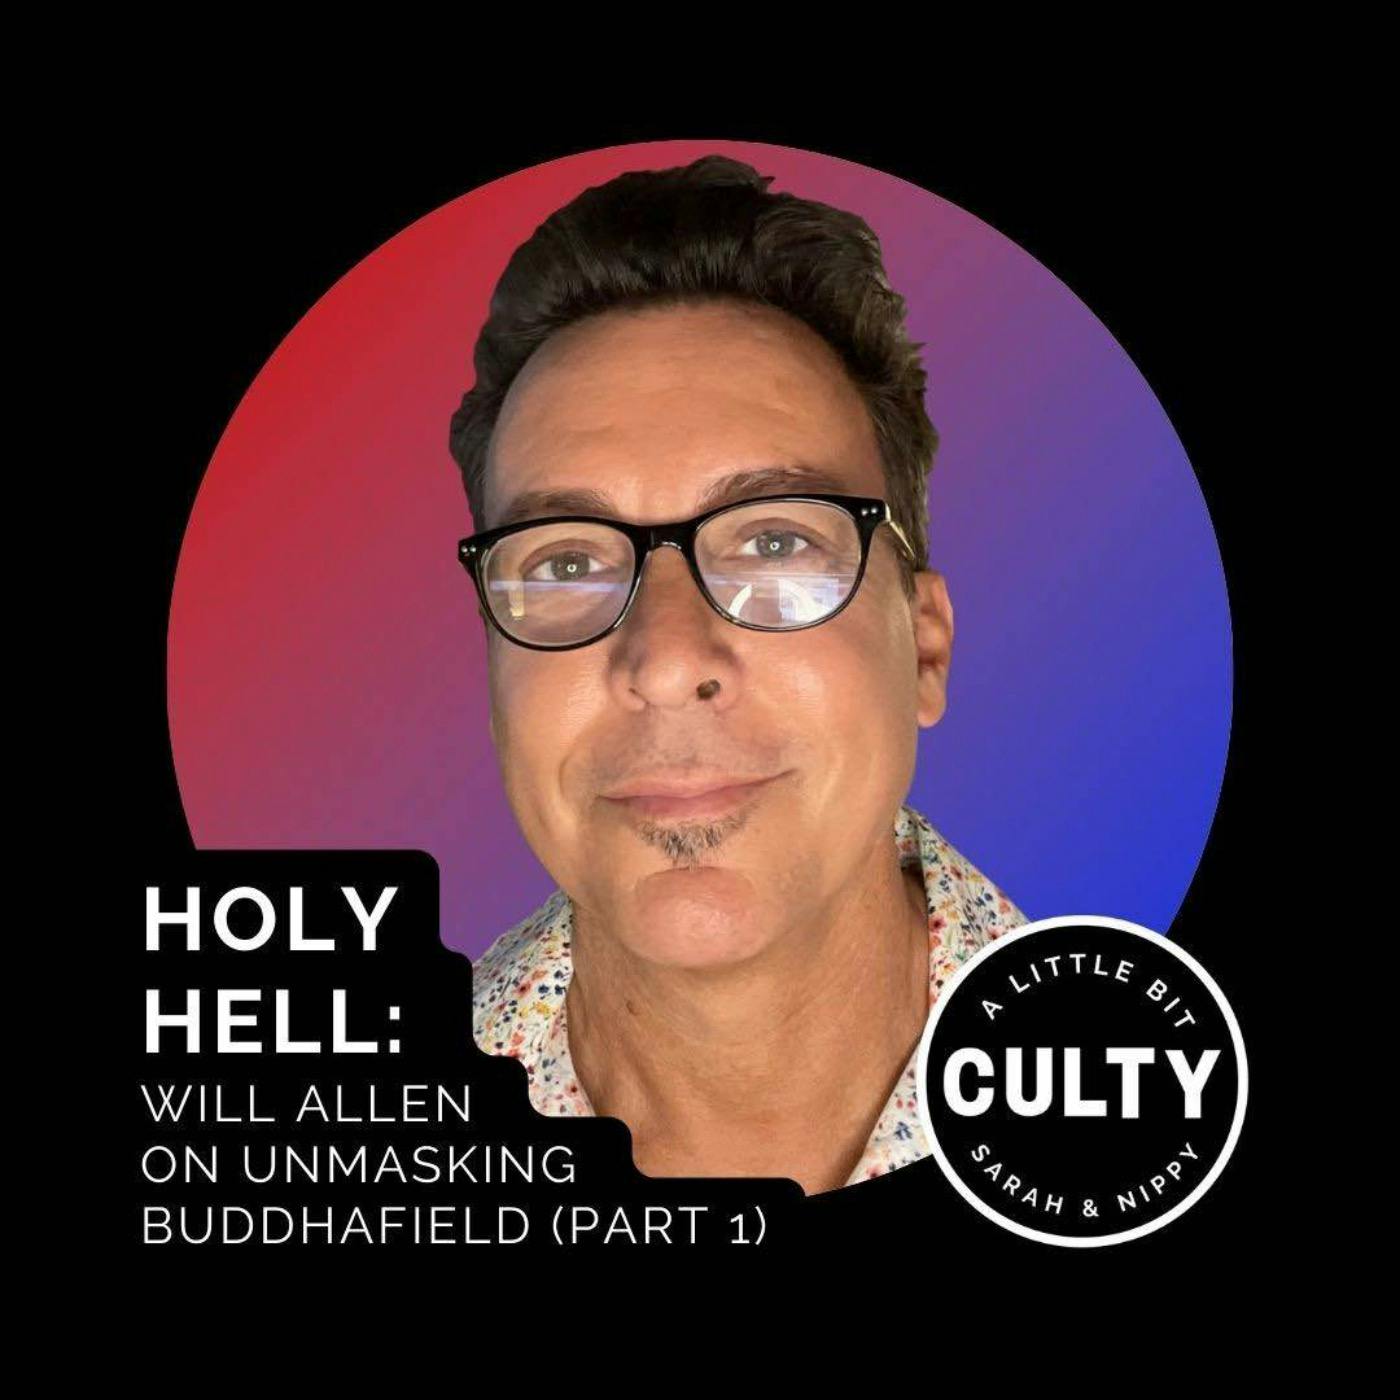 Holy Hell: Will Allen on Unmasking Buddhafield (Part 1)